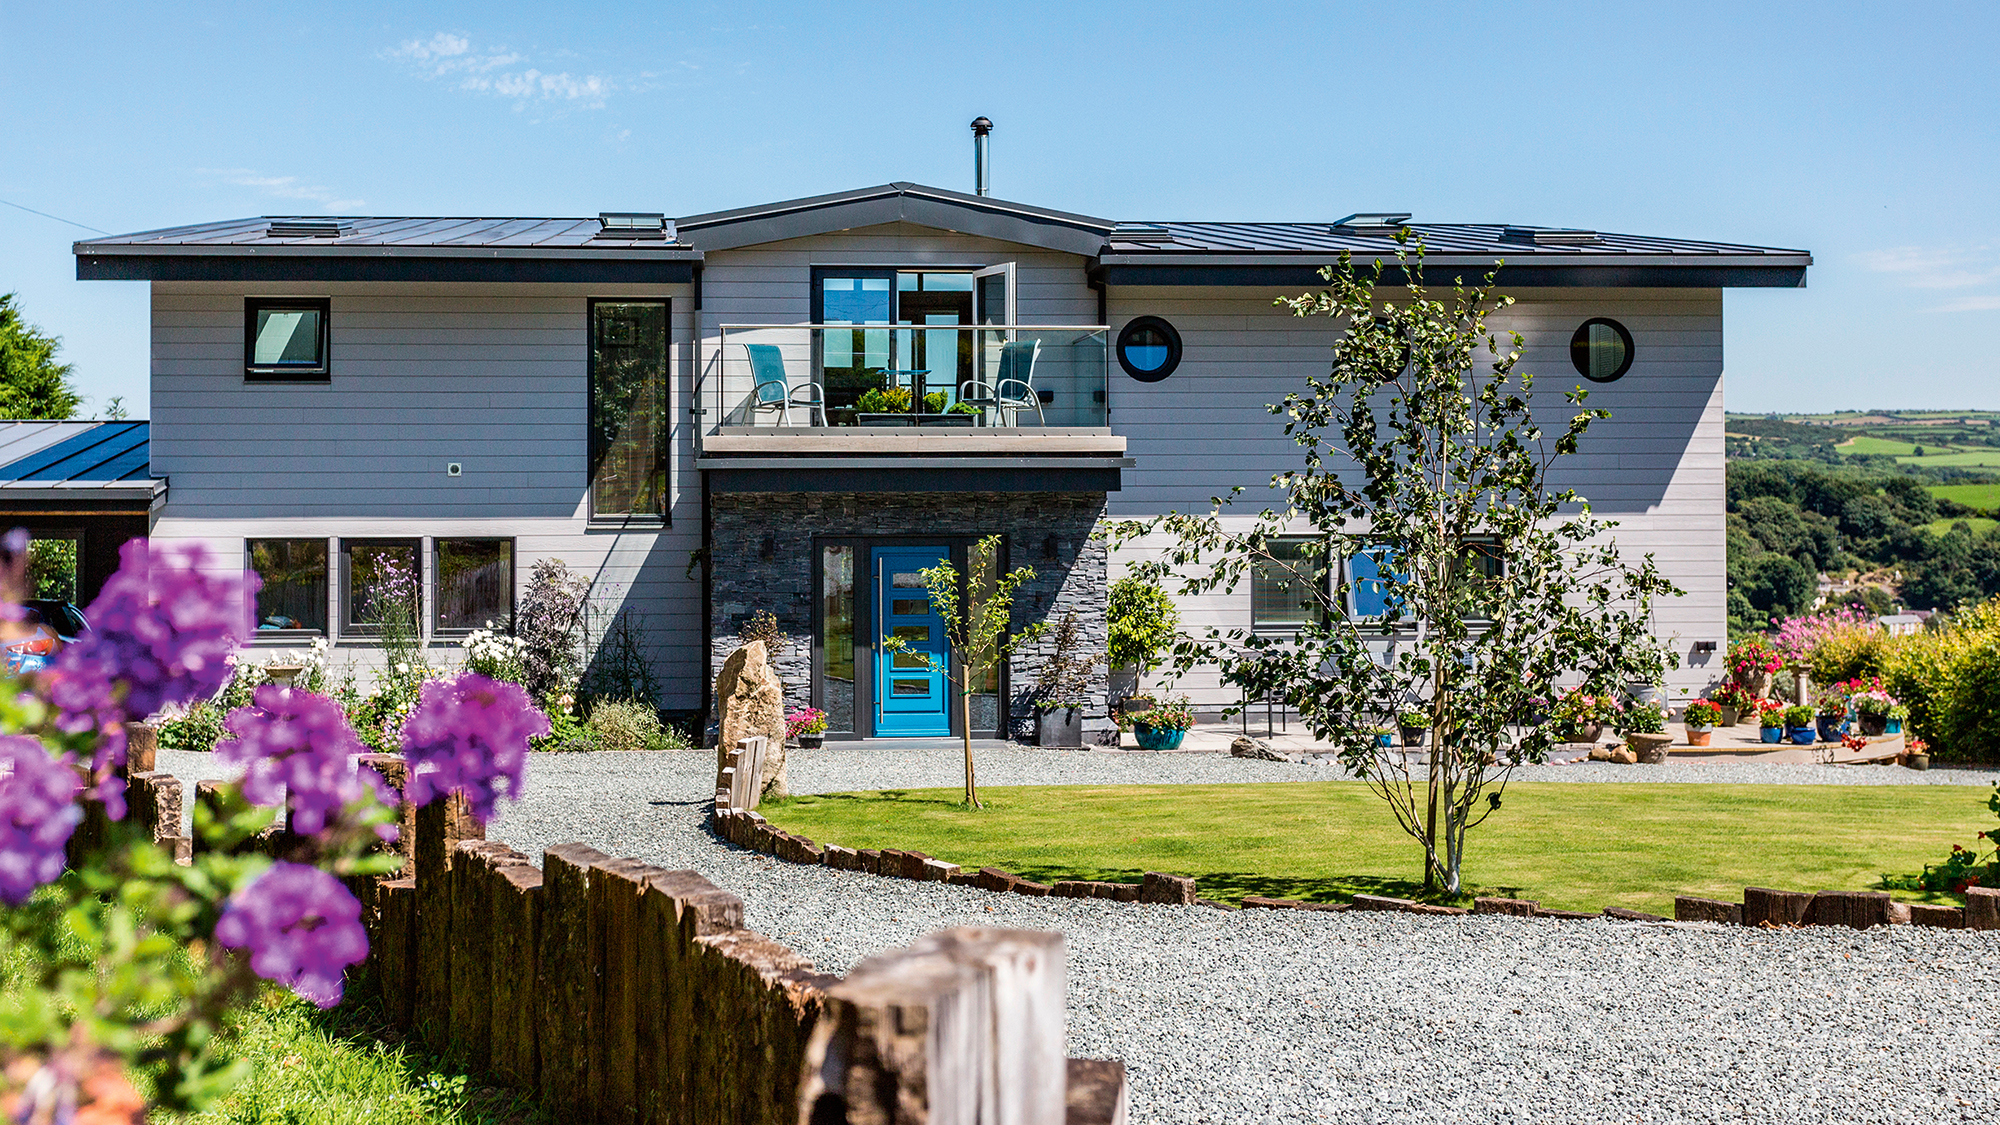 Located on the North Wales coast, this timber frame by Scandia-Hus features Marley Eternit’s Cedral Click fibre-cement cladding – a low-maintenance option for the seaside setting